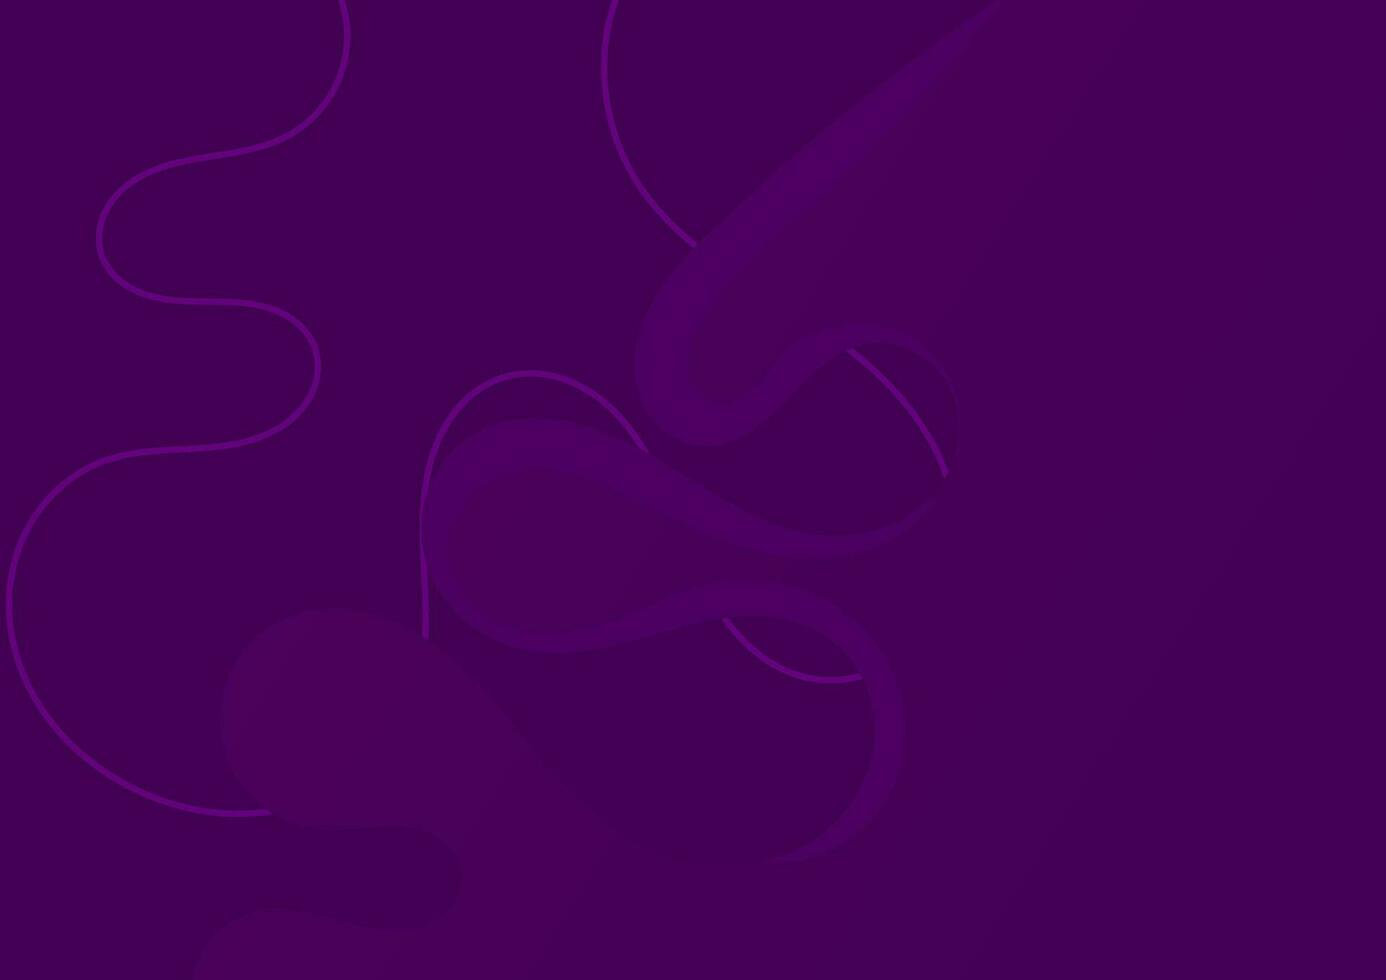 Abstract vector background. Purple-colored with wave patterns. Featuring a copy space area. Suitable for presentation slides, banners, homepages, websites, covers, and wallpapers.